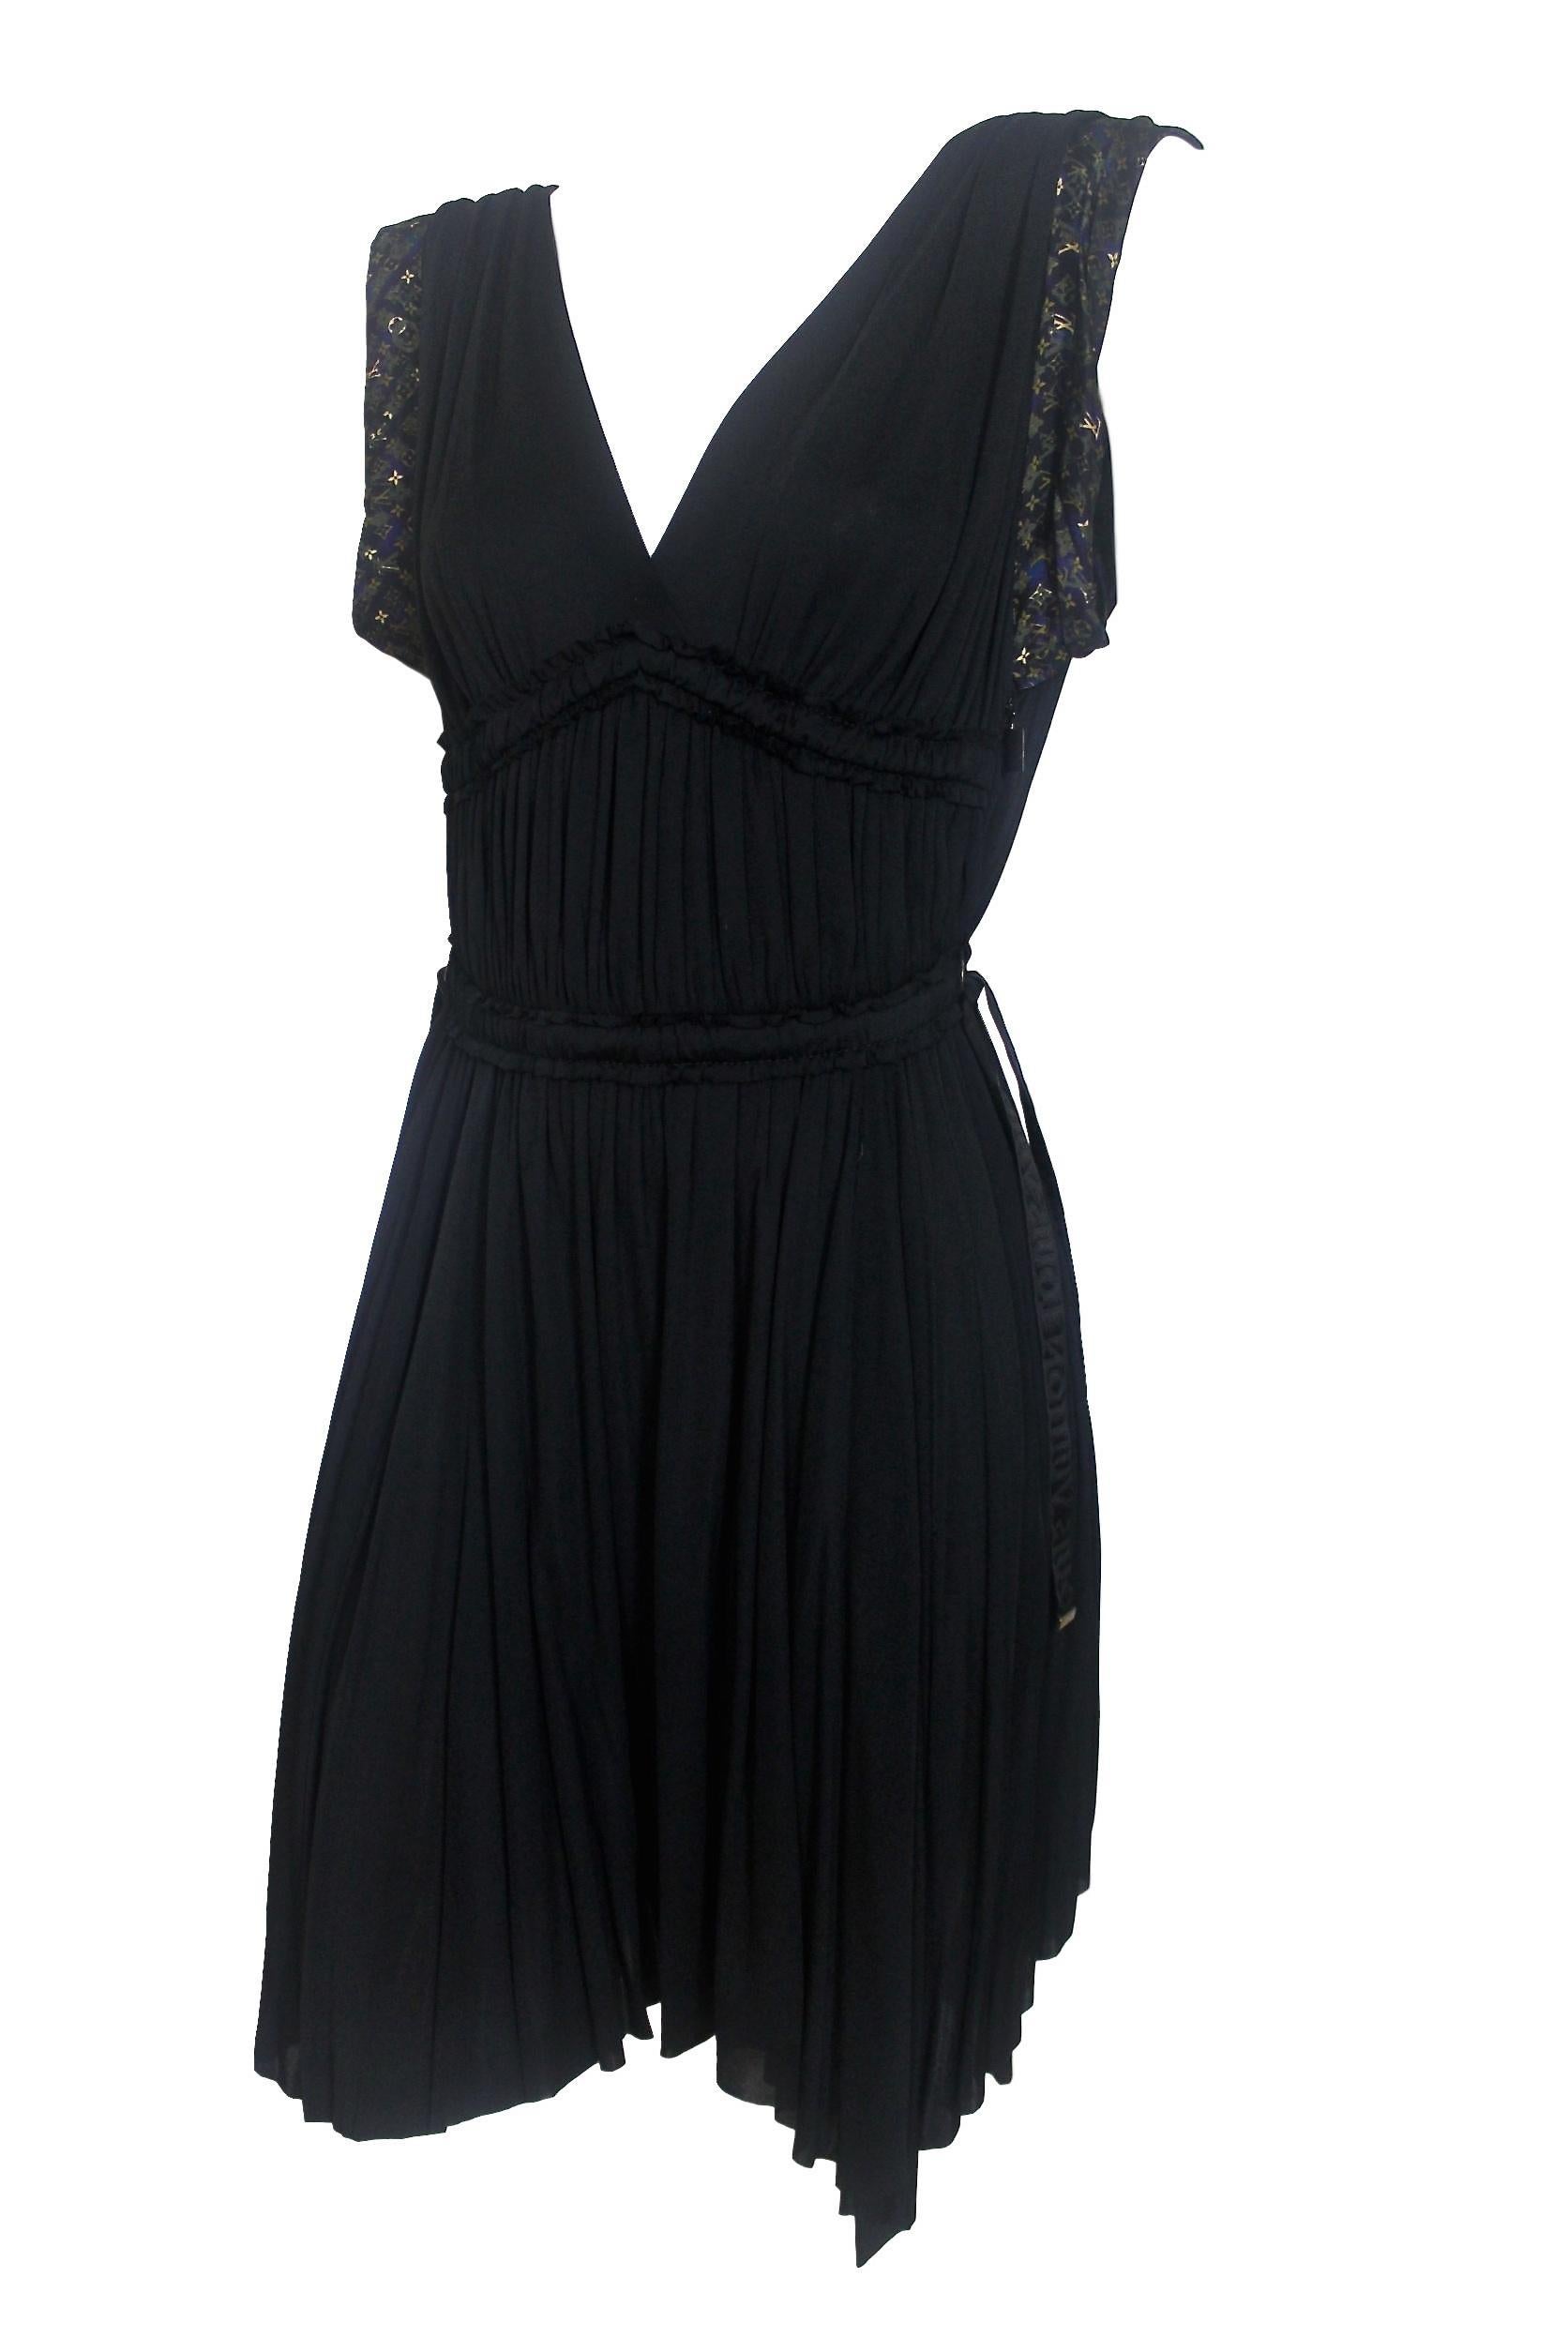 Louis Vuitton Grecian Style Dress In Good Condition For Sale In Bath, GB